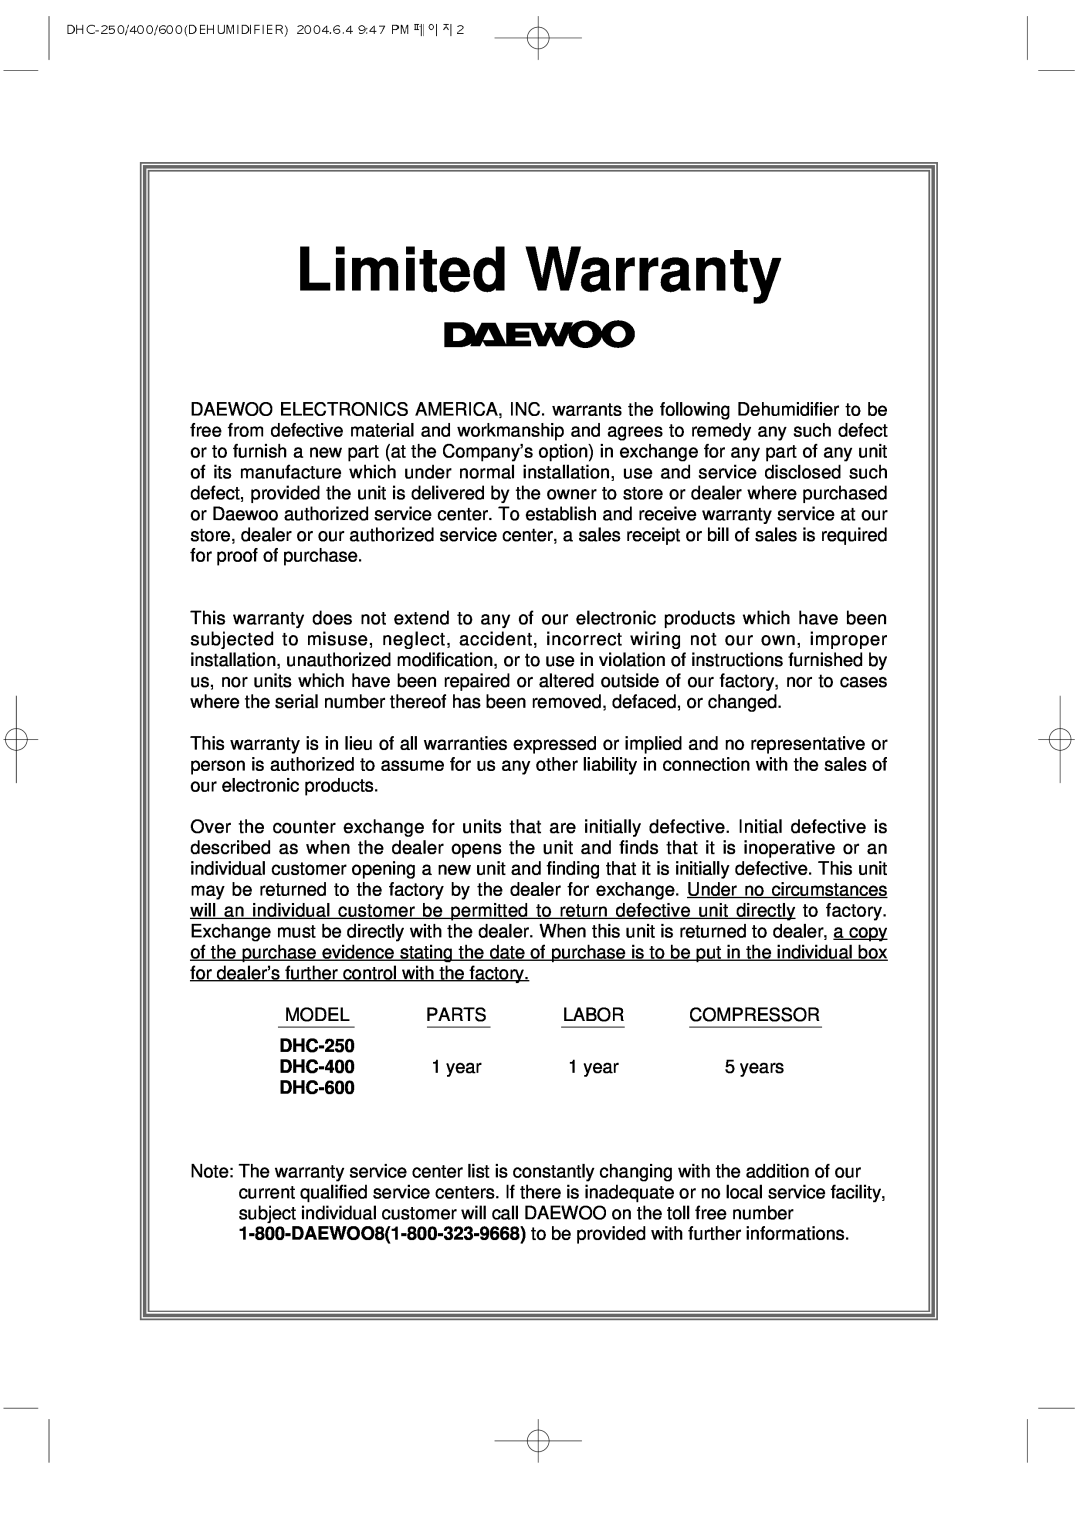 Daewoo DHC-250 manual Limited Warranty, DHC-400, DHC-600 